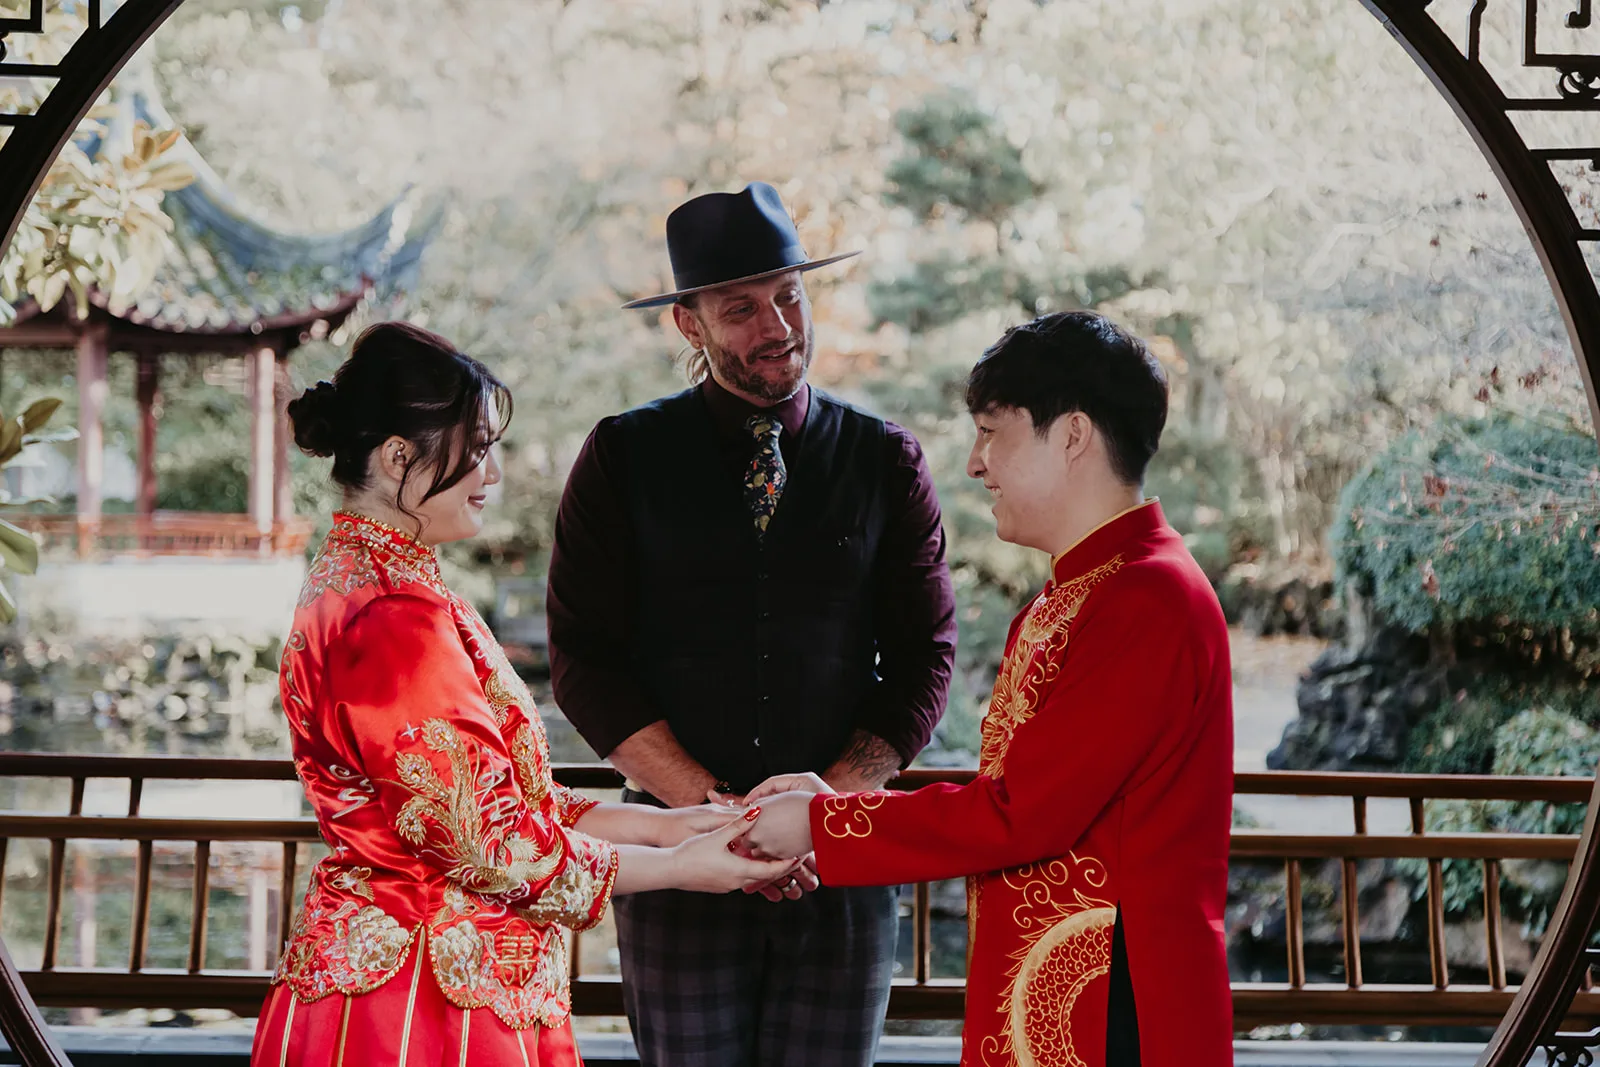 ring exchange between couple at Young Hip & Married wedding ceremony